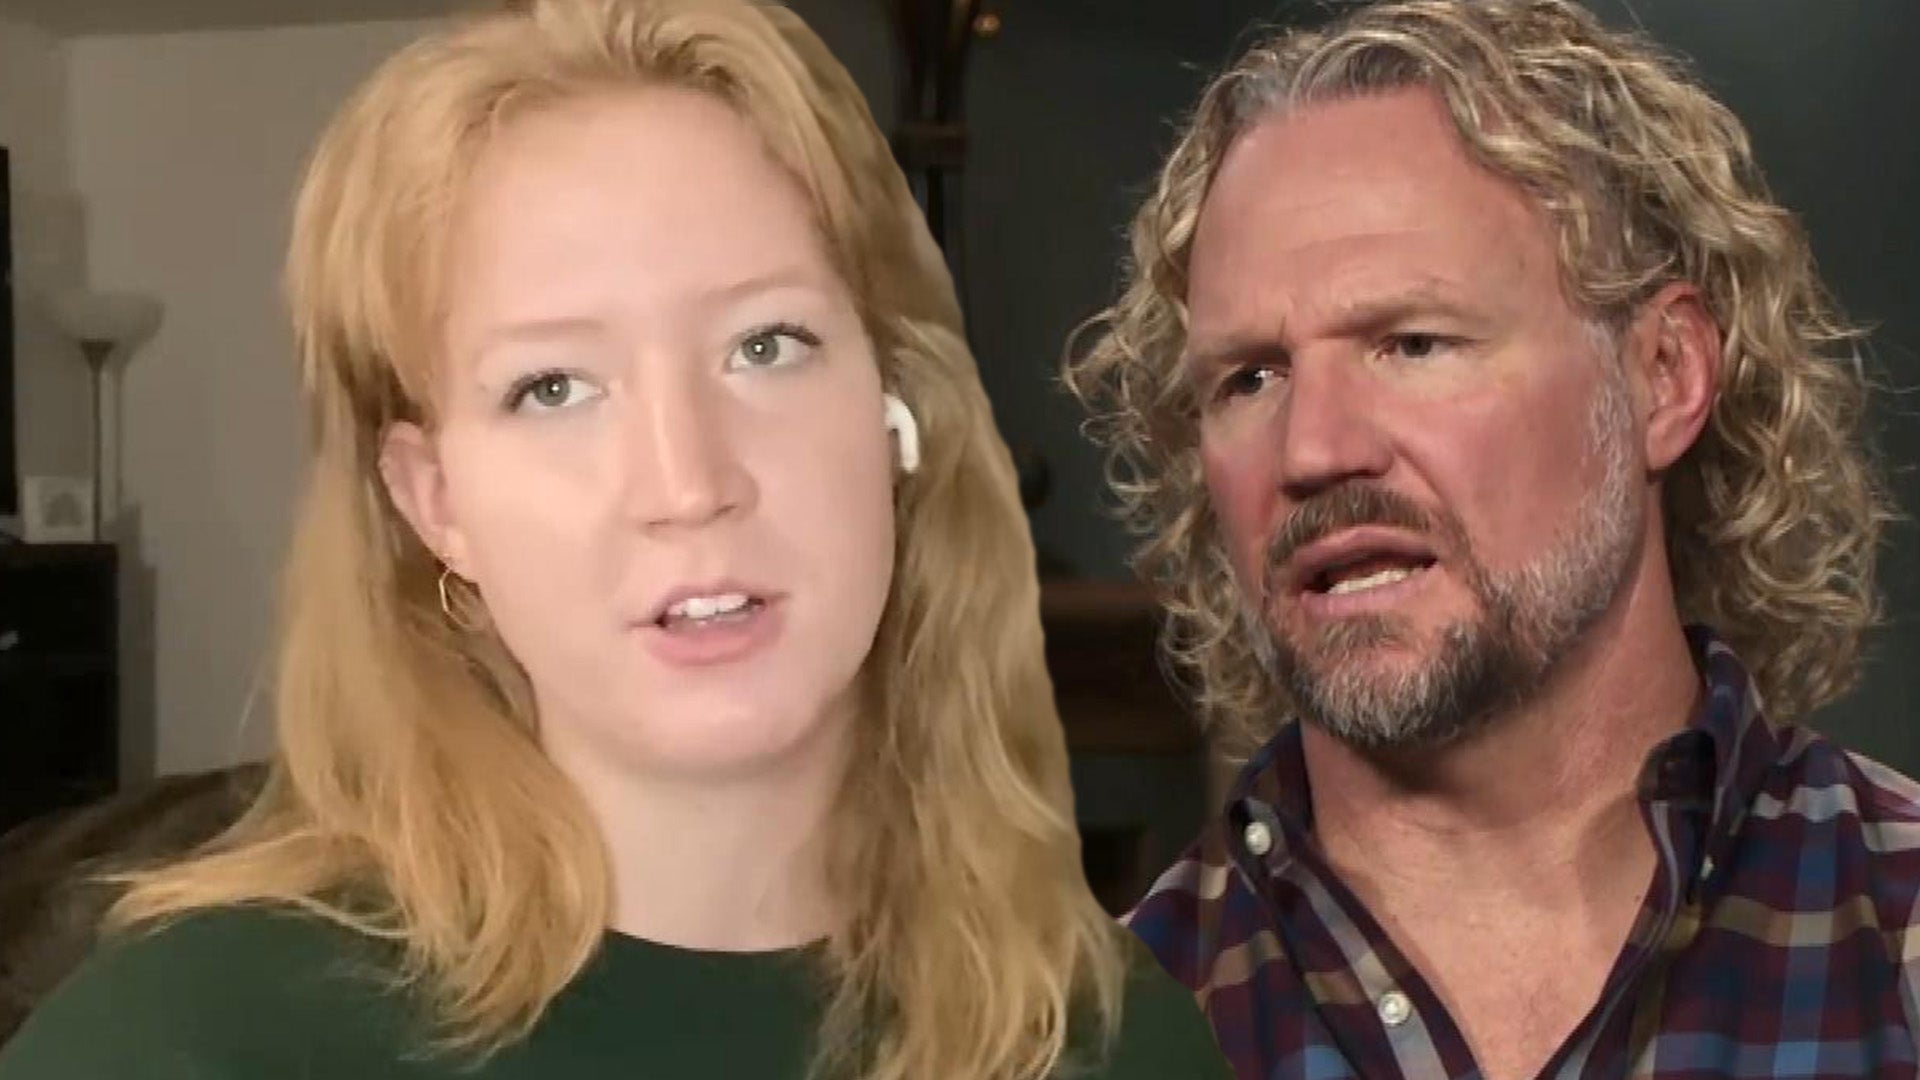 Sister Wives' Star Gwendlyn Talks 'Useless' Dads Who 'Can't Take Care of'  Kids While Watching Kody on Show | Entertainment Tonight